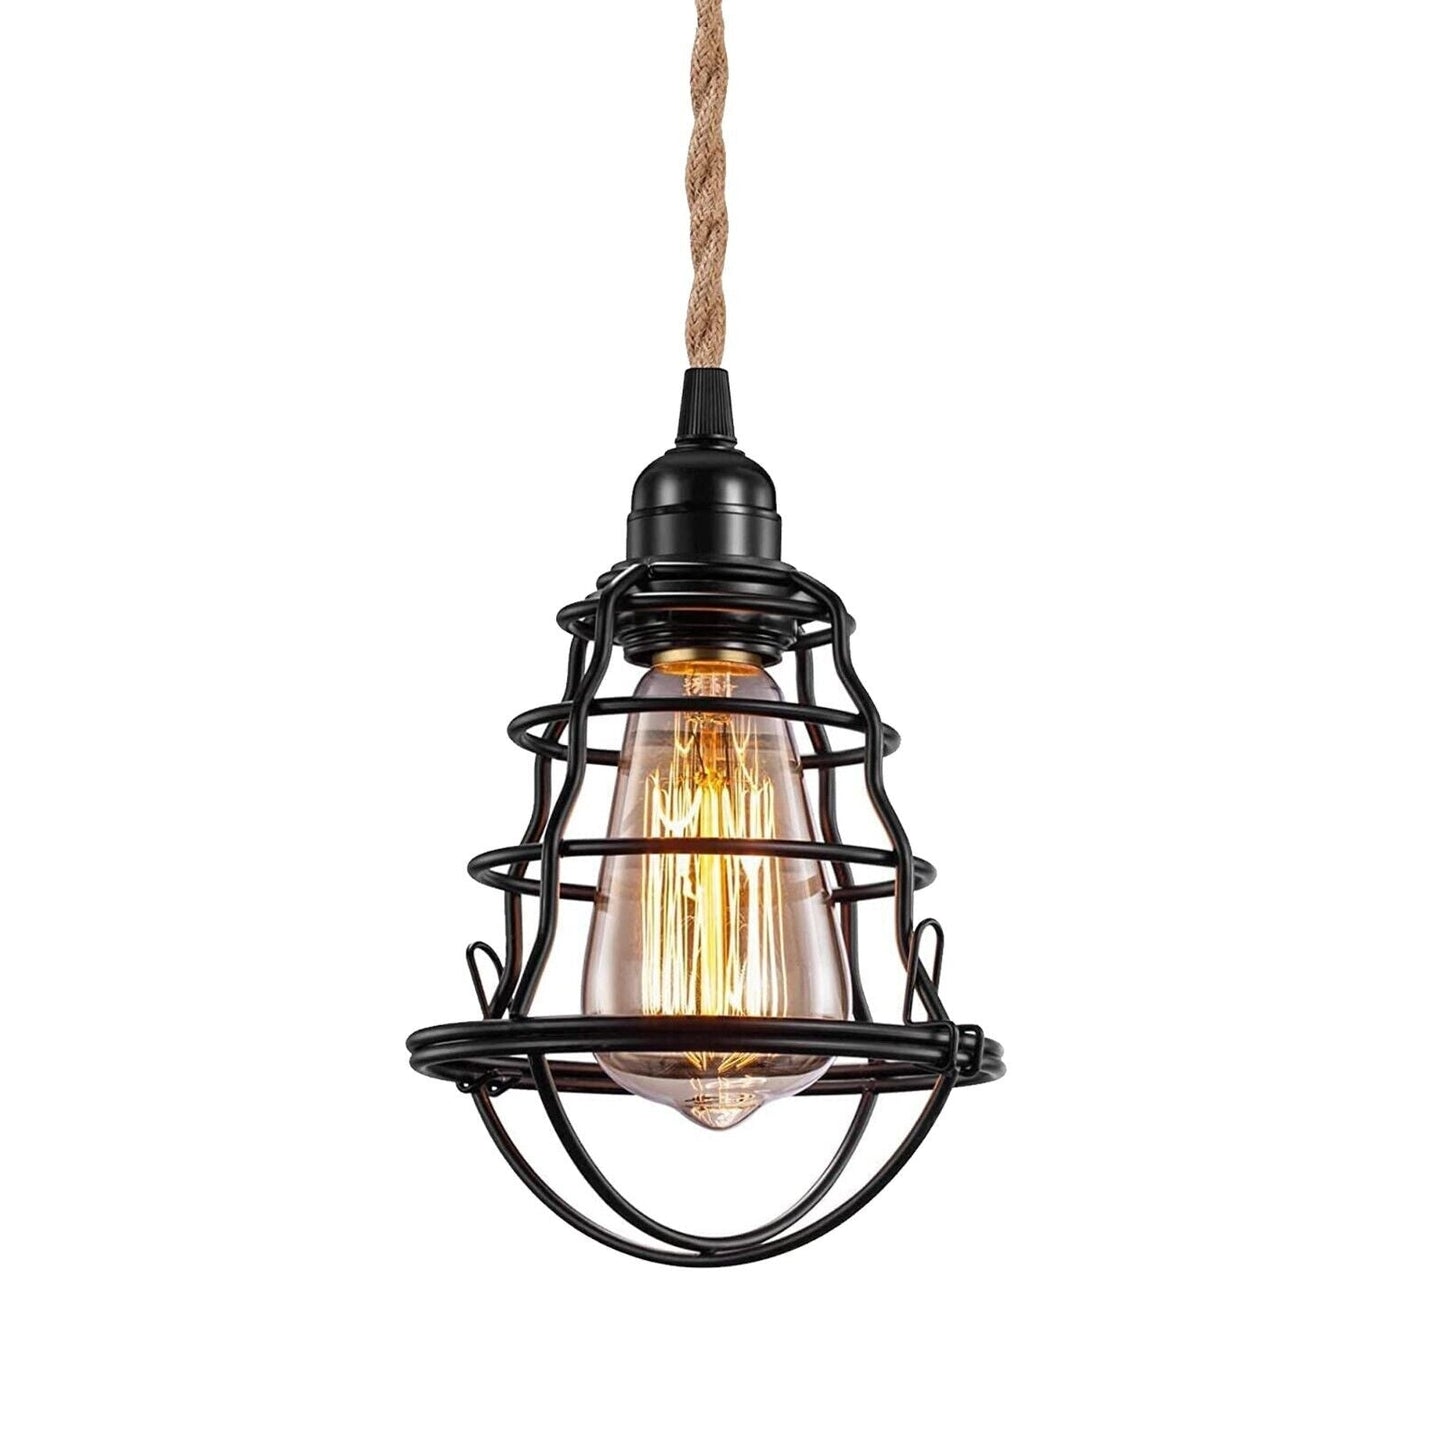 Rope Pendant Light - Plug in Pendant Light with Dimmer Switch.JPG